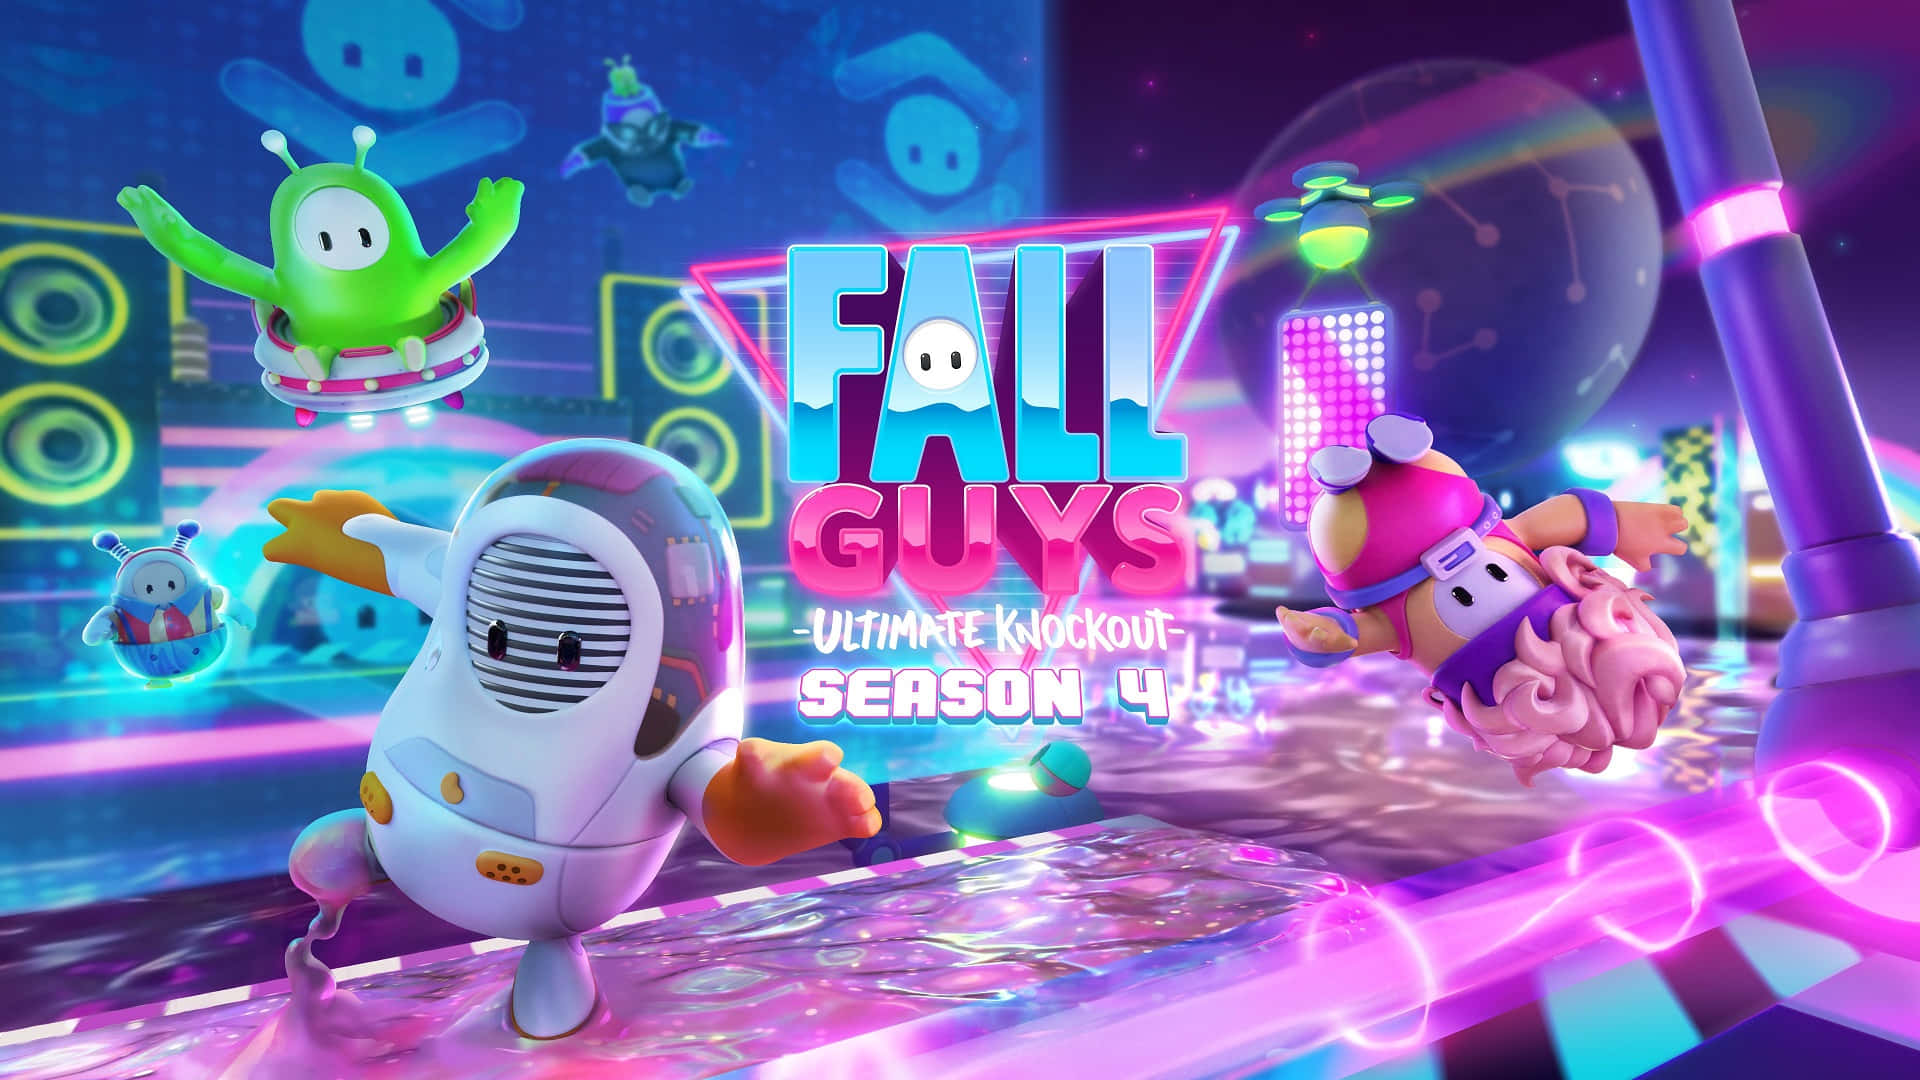 "Gather Around, it's Time to Play 'Fall Guys'!"